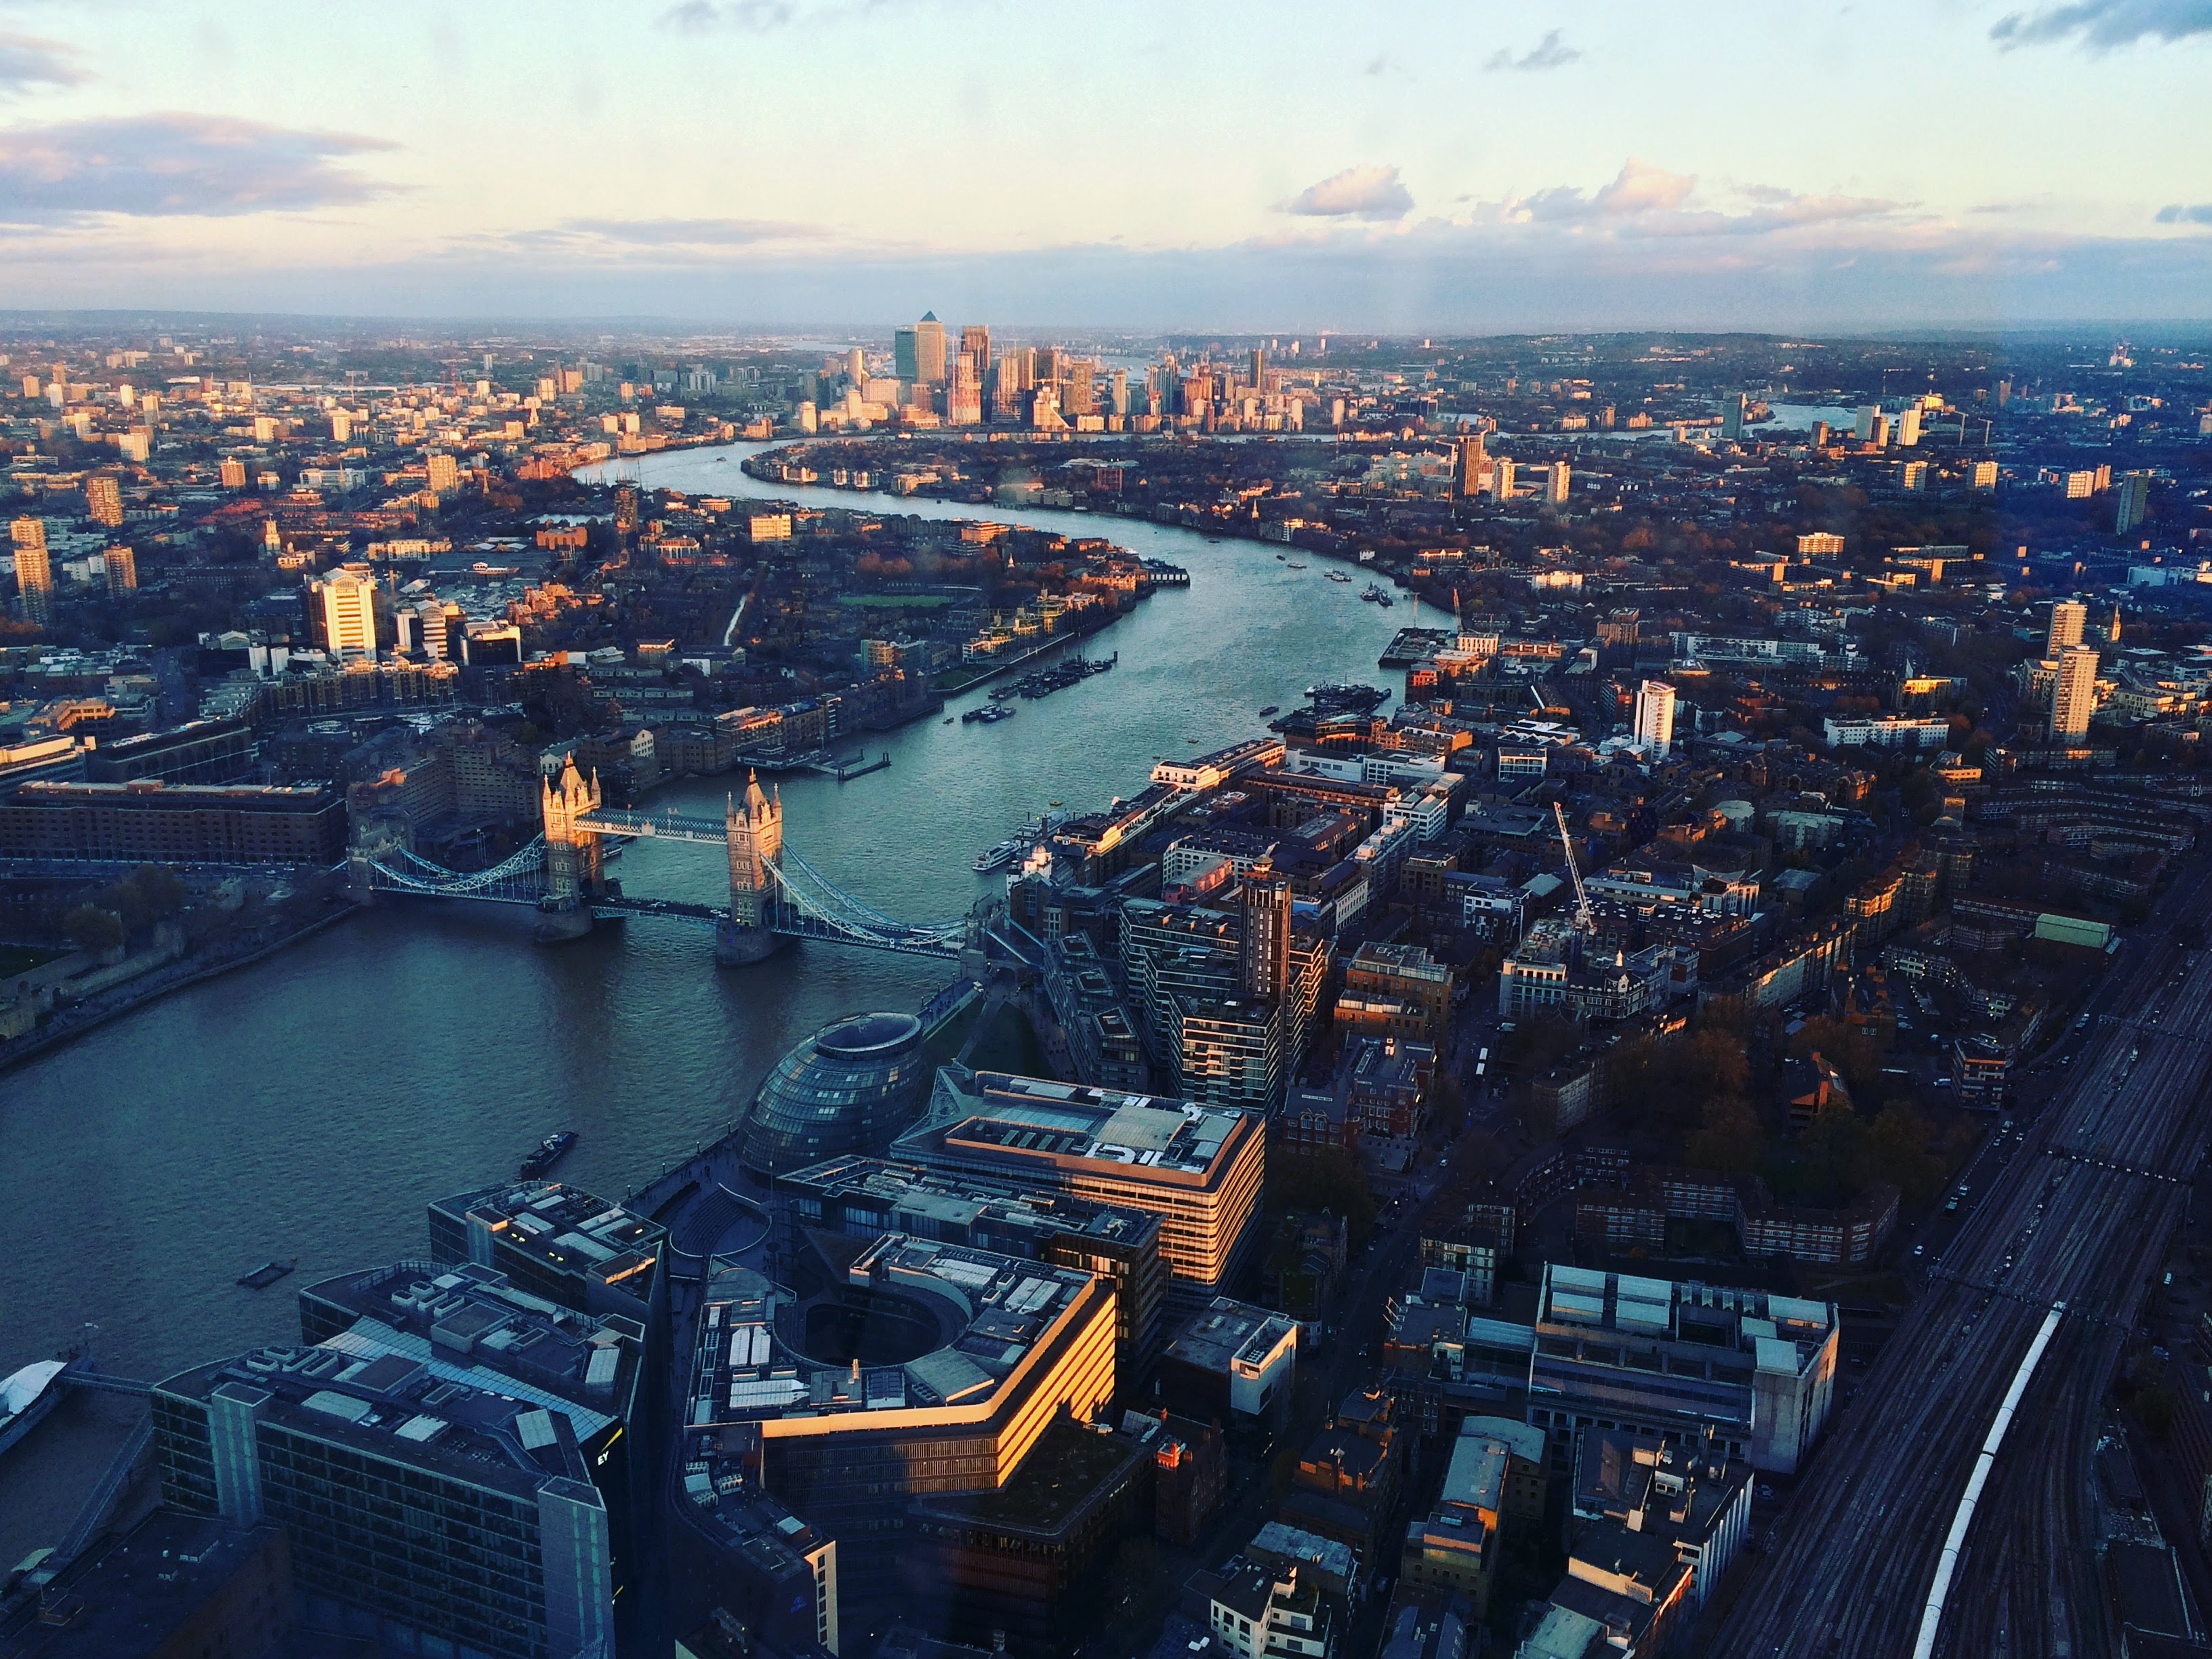 View taken atop the Shard in London, England.